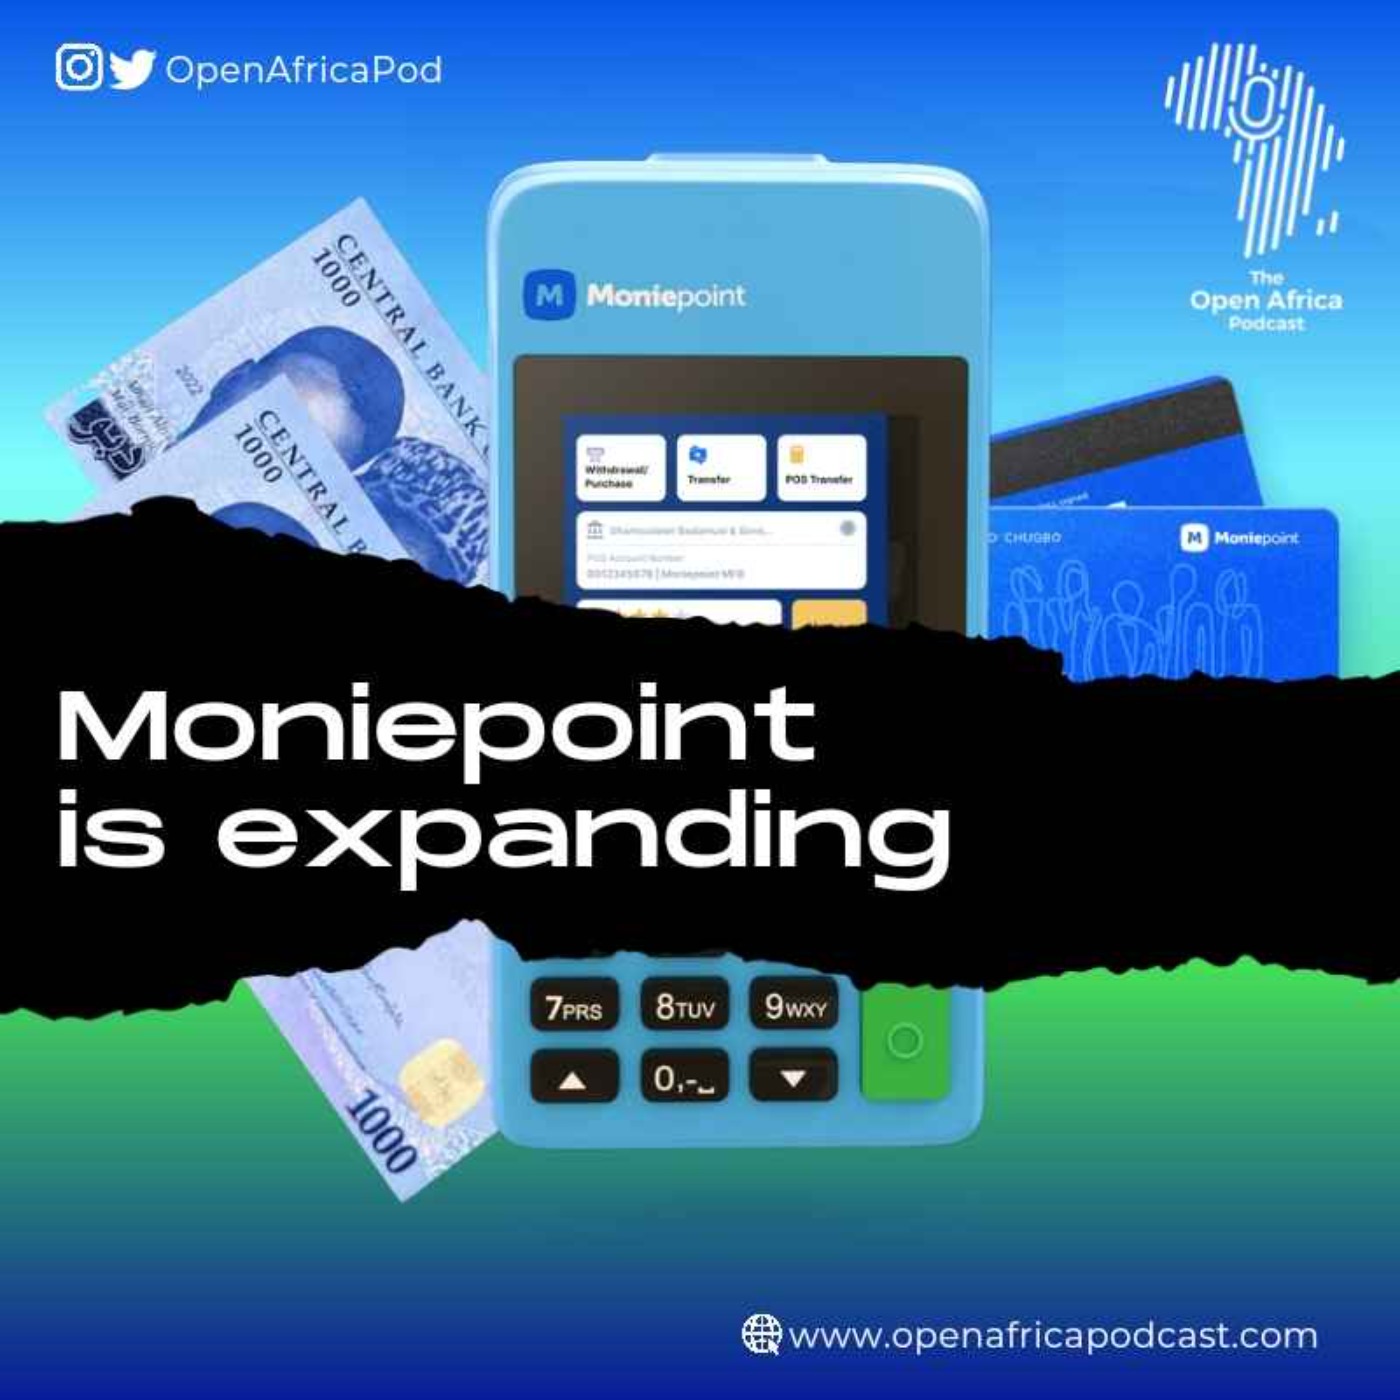 Moniepoint is expanding